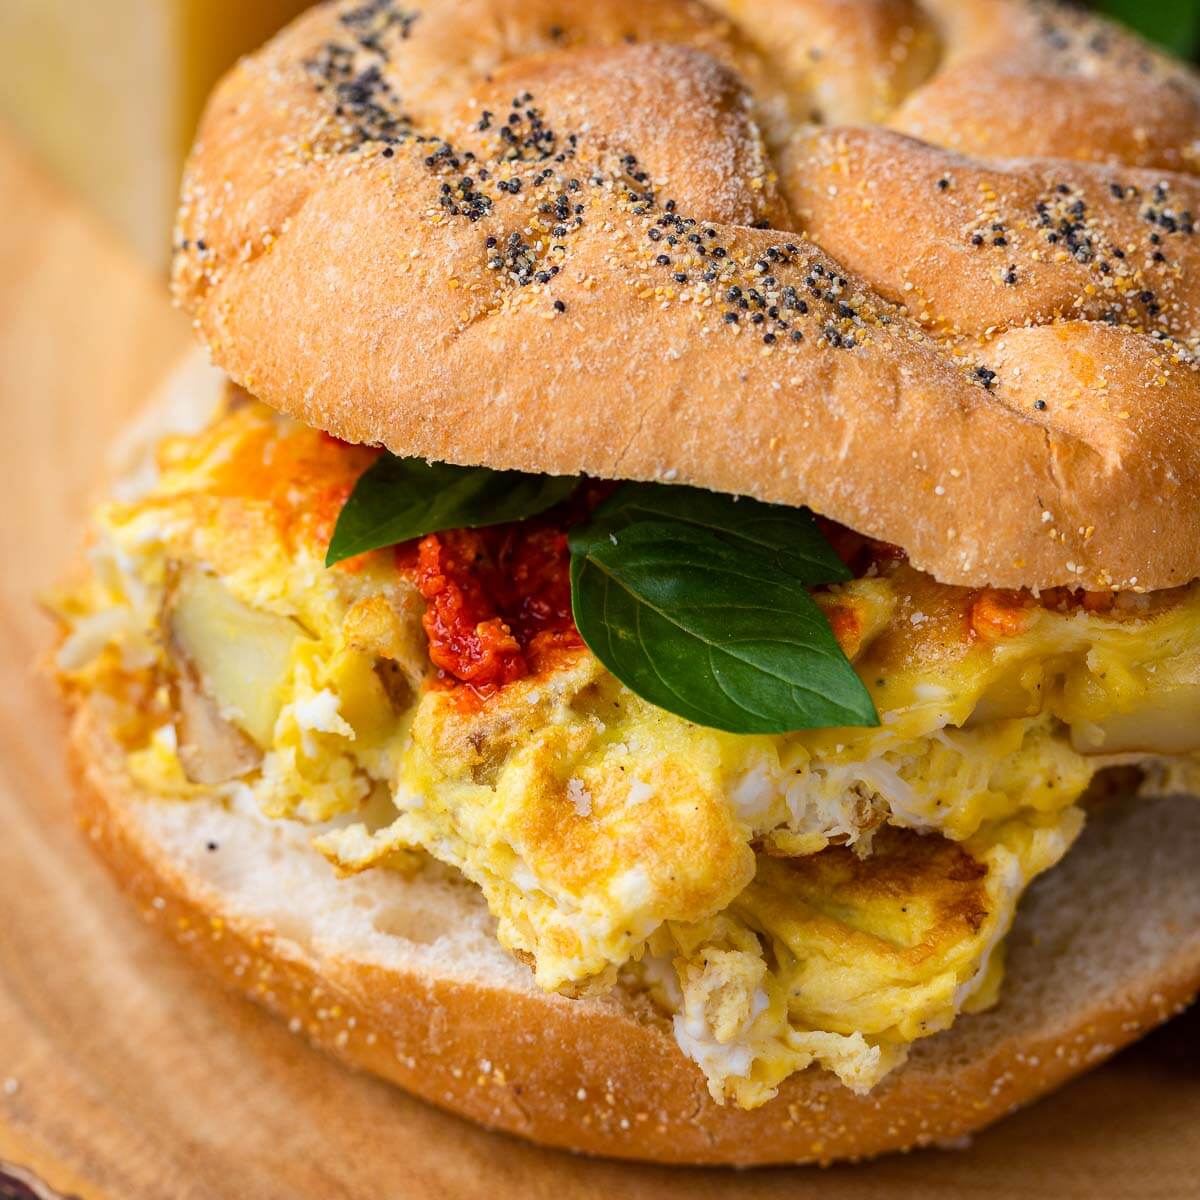 Potato and Egg Sandwich - Sip and Feast